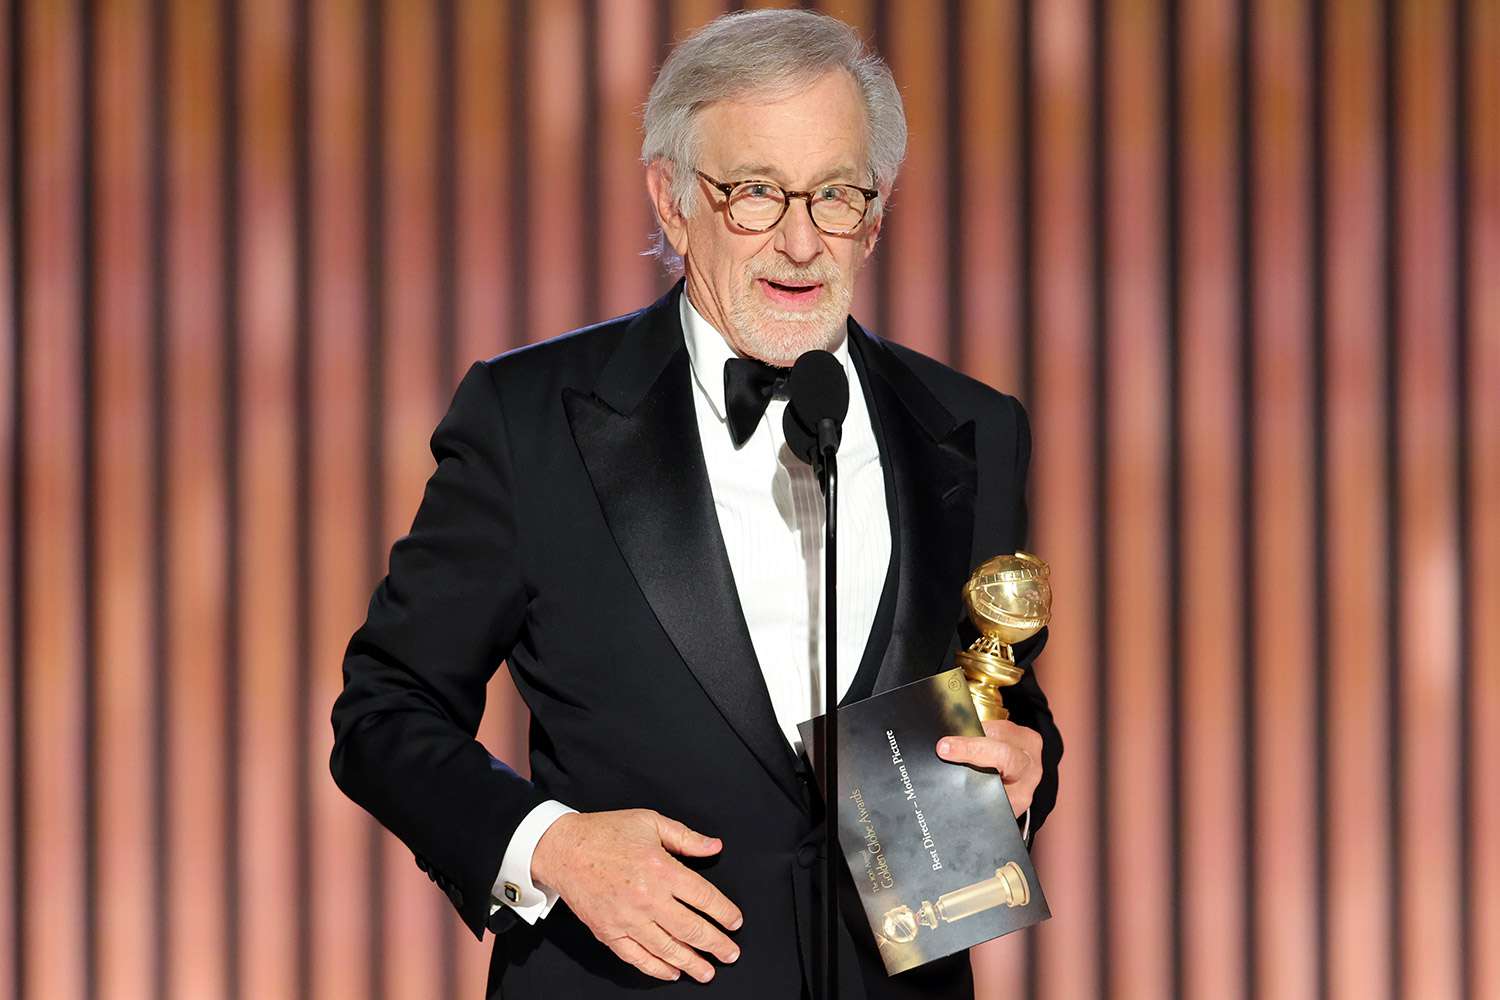 Steven Spielberg accepts the Best Director award for "The Fabelmans" onstage at the 80th Annual Golden Globe Awards held at the Beverly Hilton Hotel on January 10, 2023 in Beverly Hills, California.